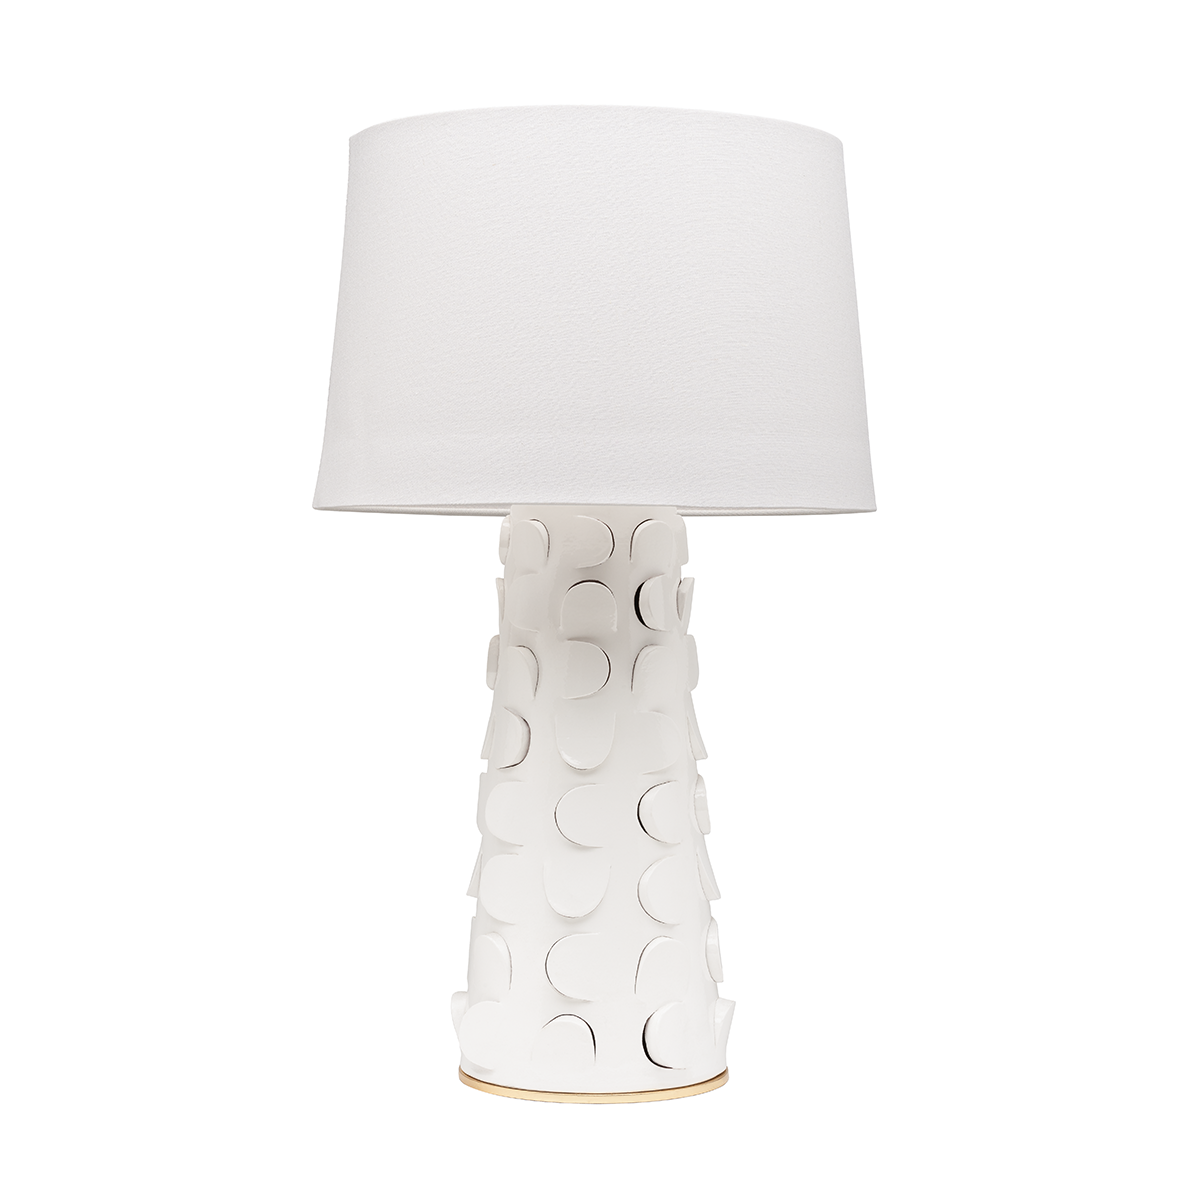 Textural and Retro Base with Belgian Linen Shade Table Lamp